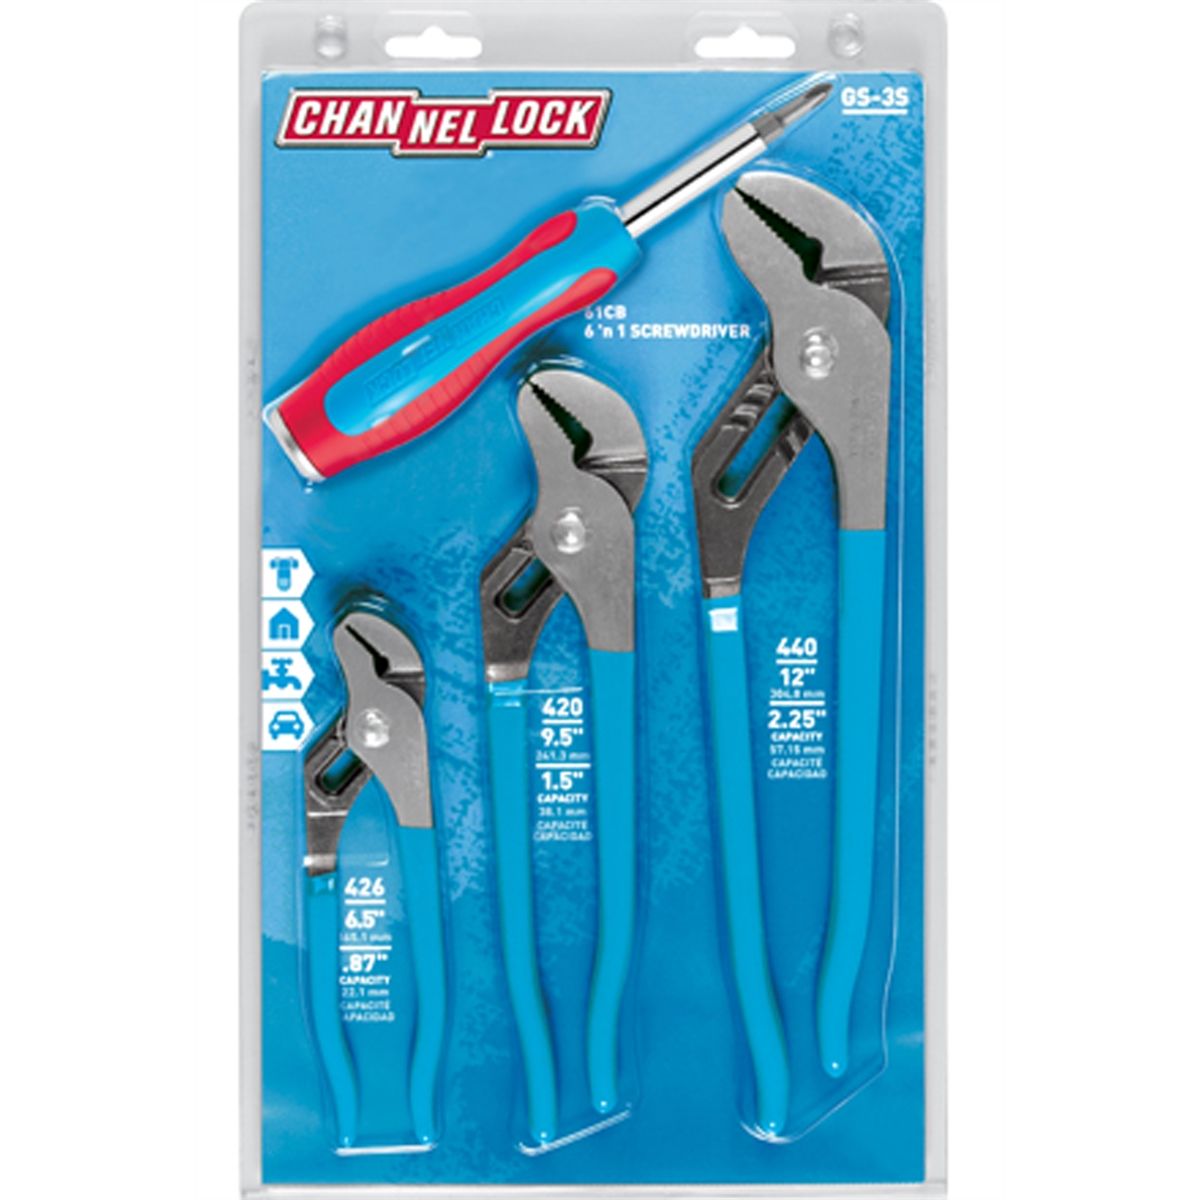 Pliers Set - 3-Pc Tongue and Groove - 426, 420 and...